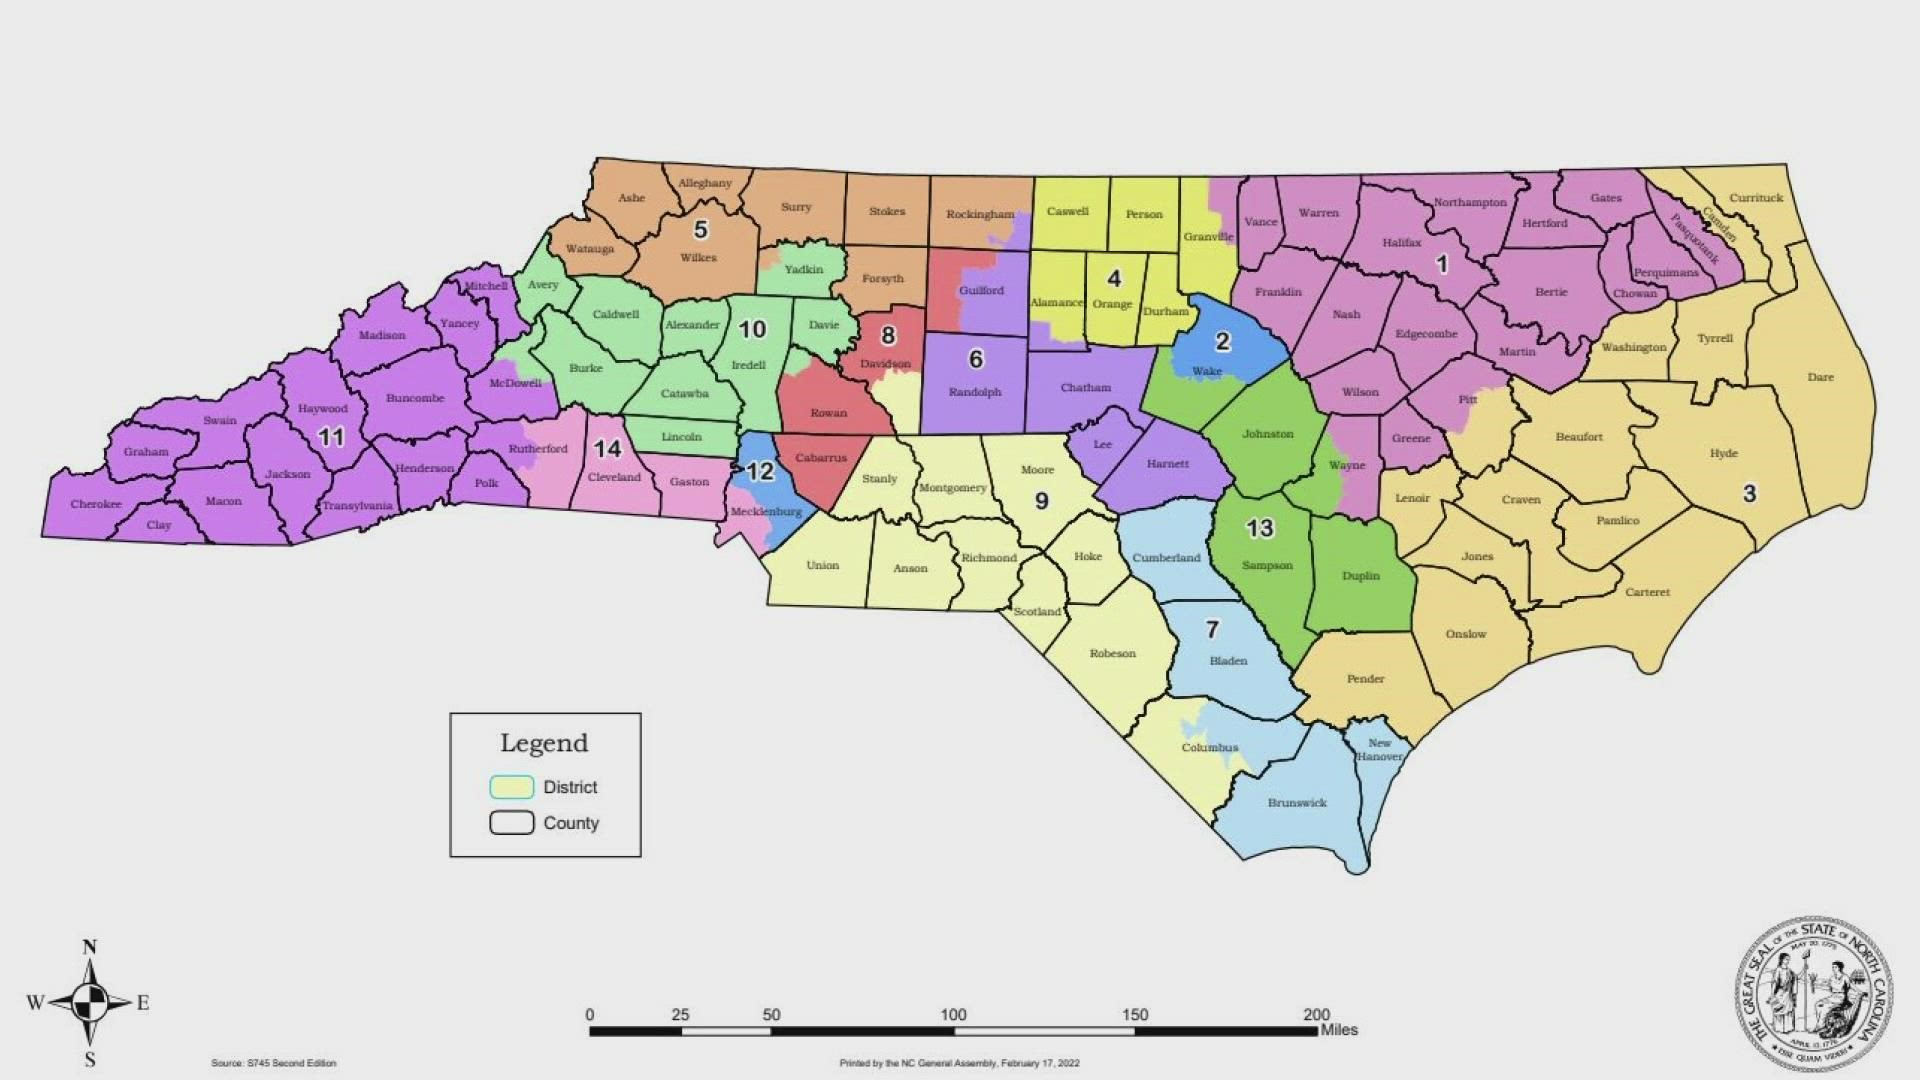 With a day to spare, North Carolina state lawmakers successfully passed new versions of congressional and legislative maps for approval by a trial court.